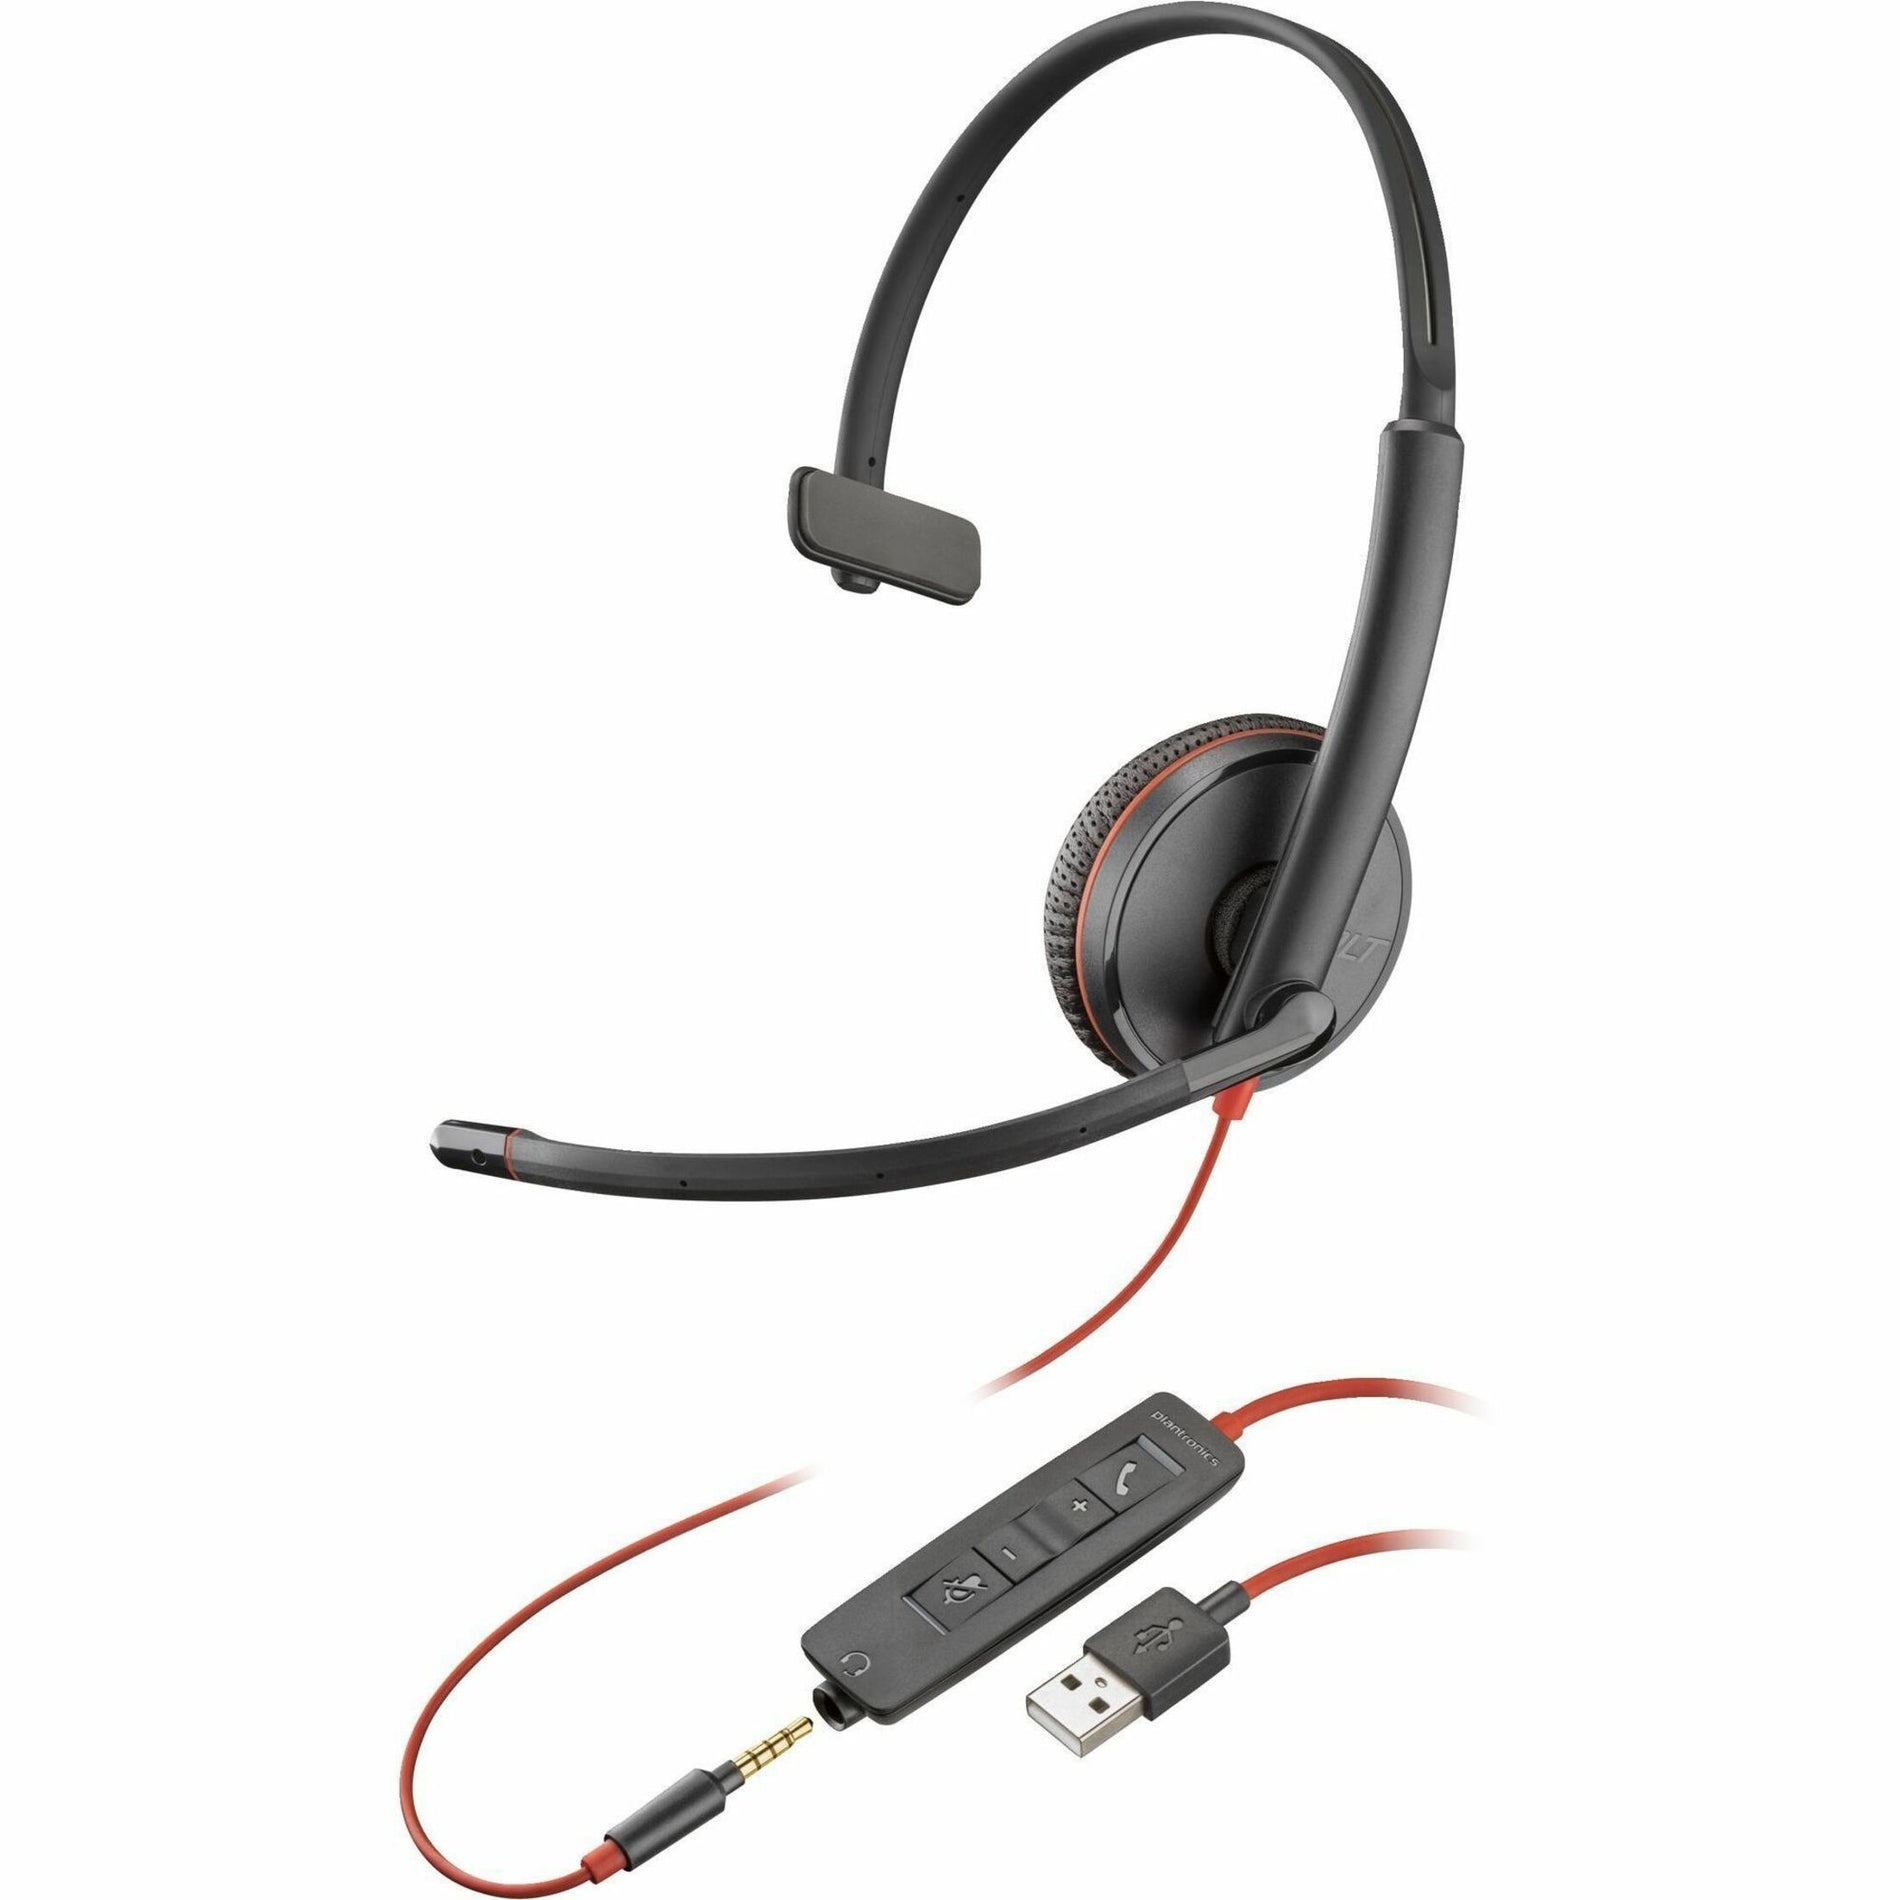 Poly 80S06AA Blackwire C3215 Headset, Monaural Over-the-head Over-the-ear, Noise Cancelling, Lightweight, Durable, Wideband Audio